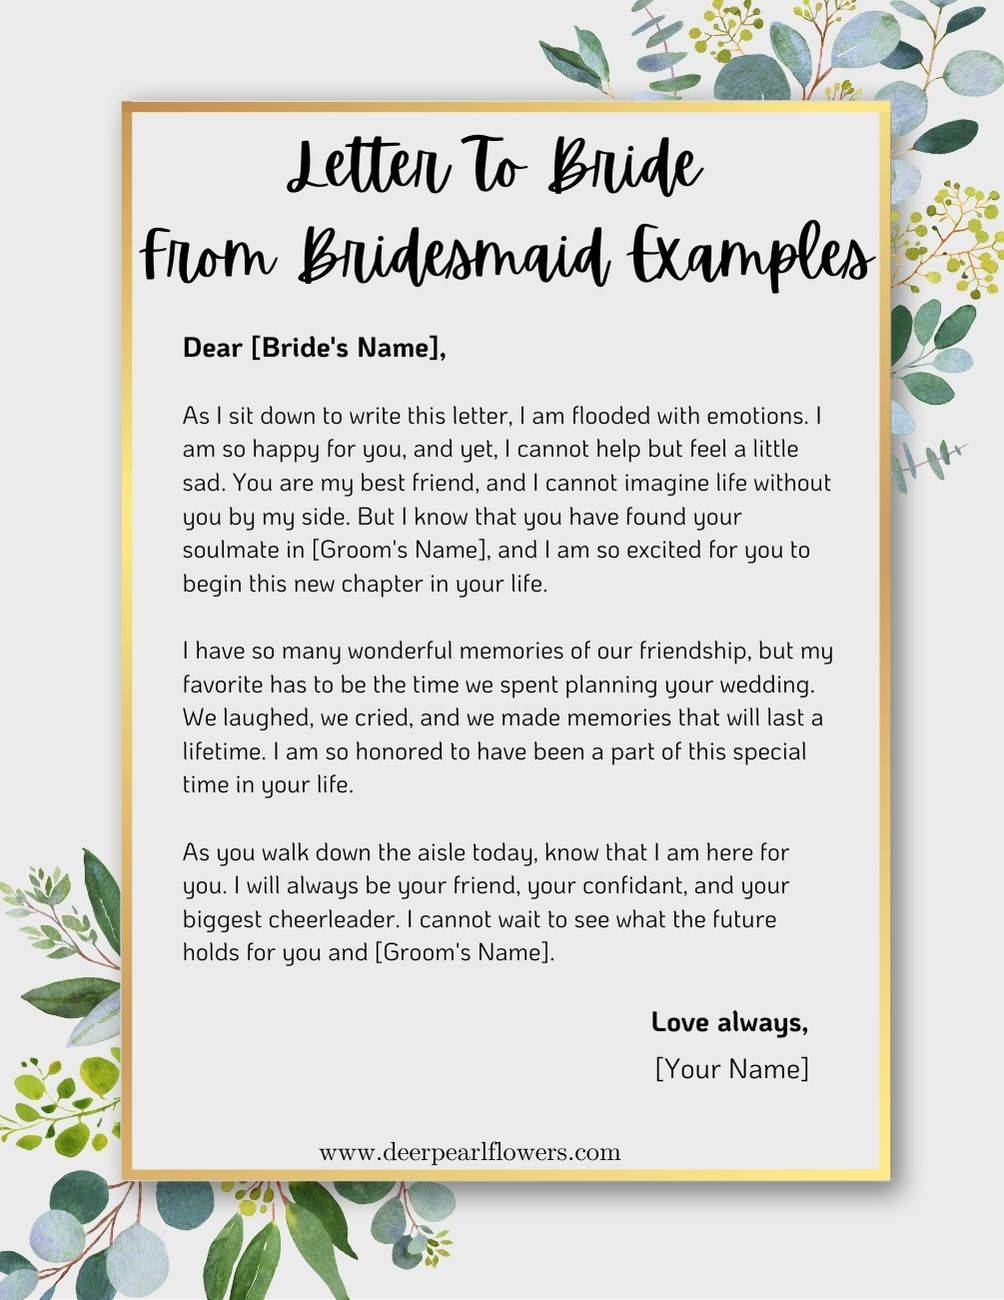 Letter To Bride From Bridesmaids Example